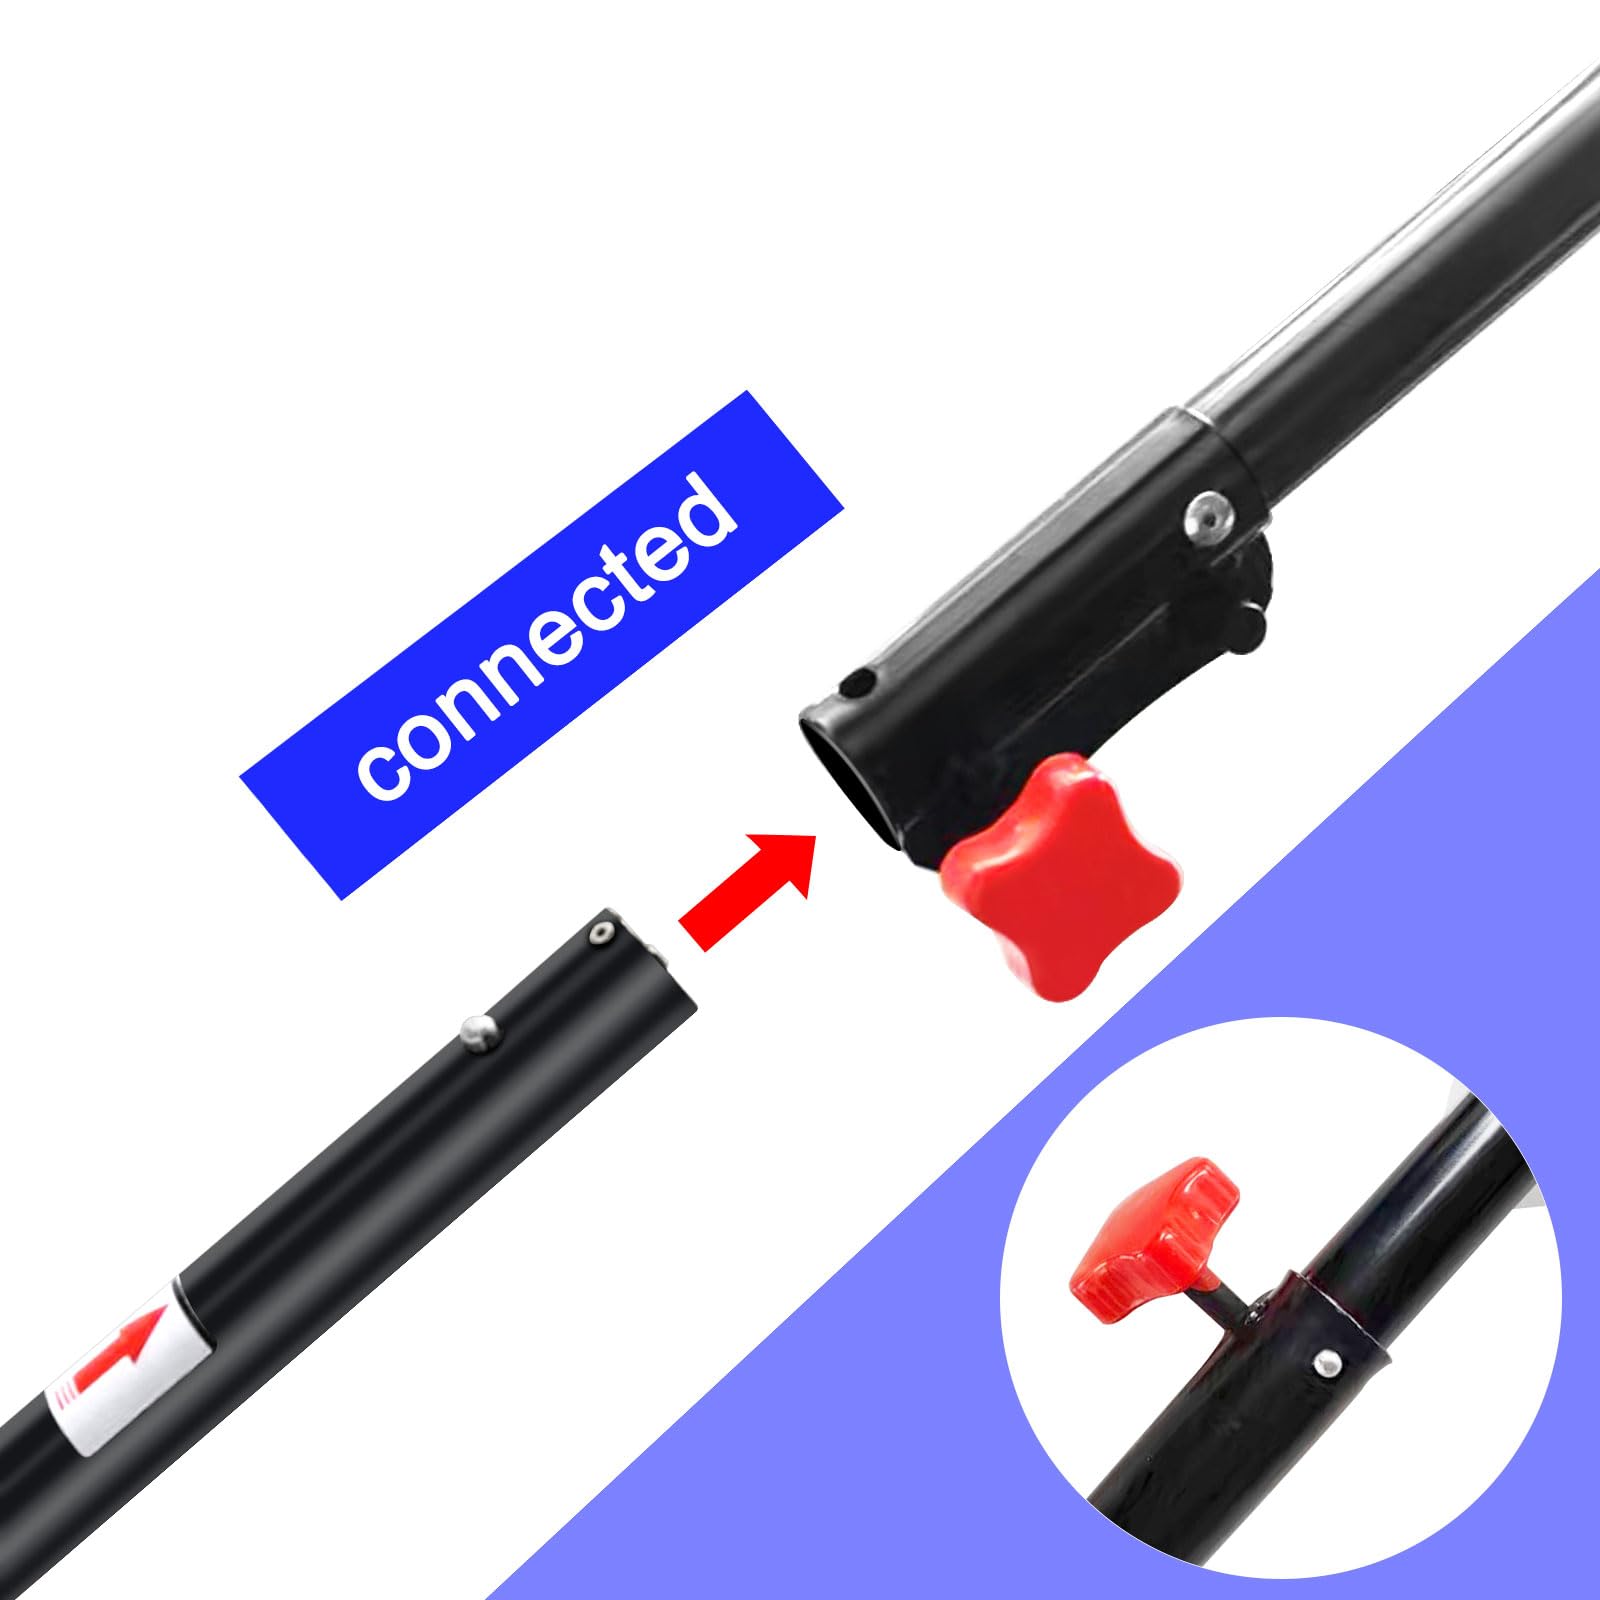 Gabasinover,Replacement parts Pole saw Attachment for Attachment Capable String Trimmers, Polesaws, and Powerheads fits for Hus 128LD, most brushcutters and Powerheads (Black）